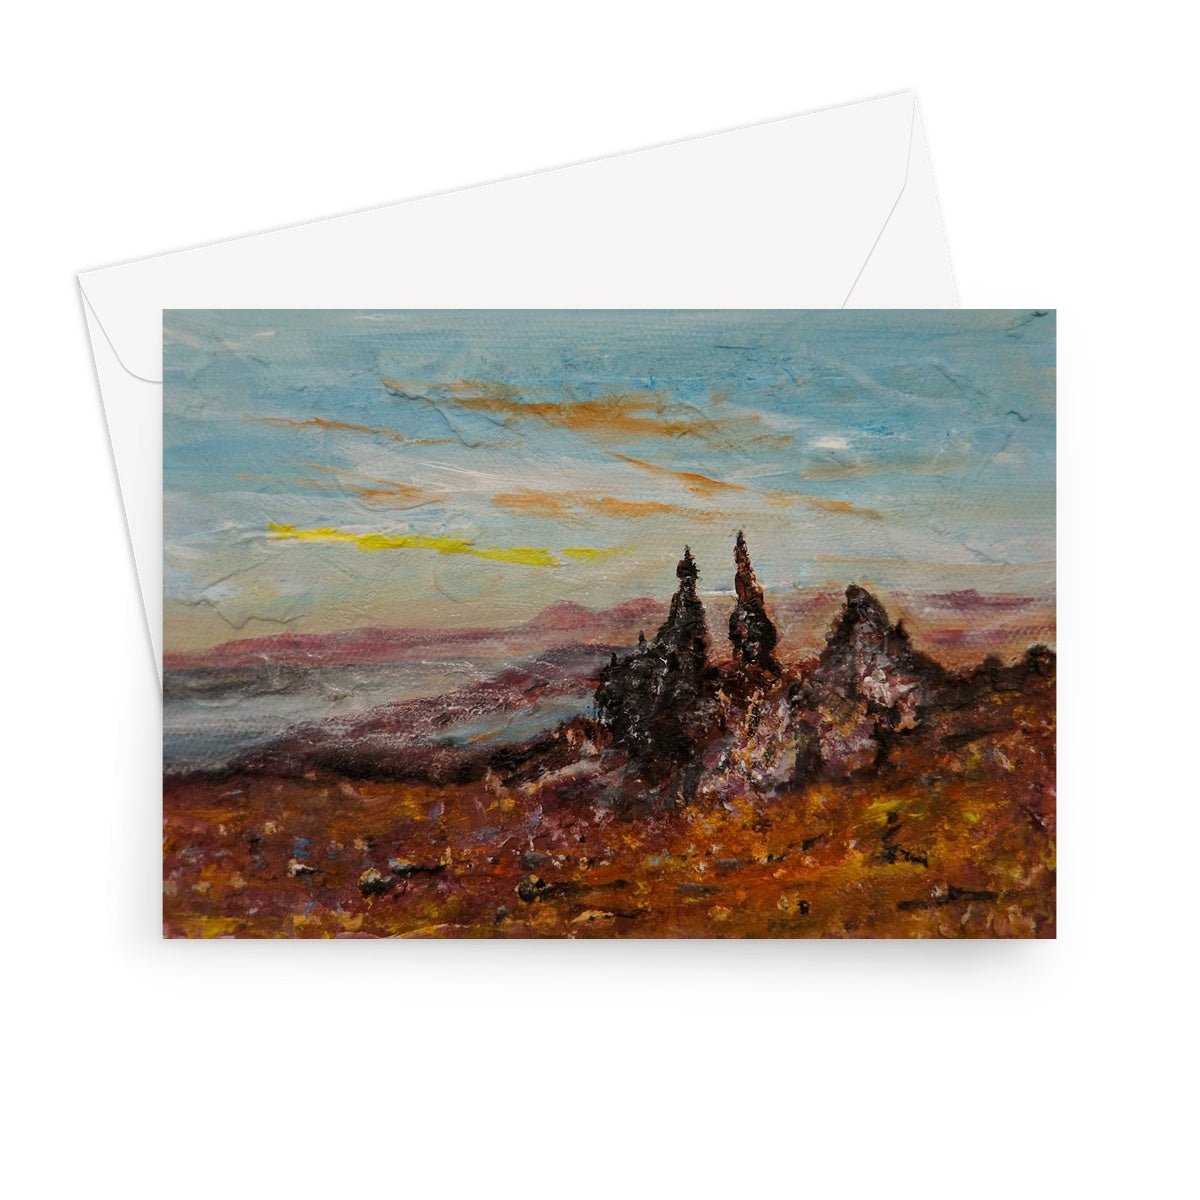 The Old Man Of Storr Skye Art Gifts Greeting Card-Greetings Cards-Skye Art Gallery-7"x5"-1 Card-Paintings, Prints, Homeware, Art Gifts From Scotland By Scottish Artist Kevin Hunter